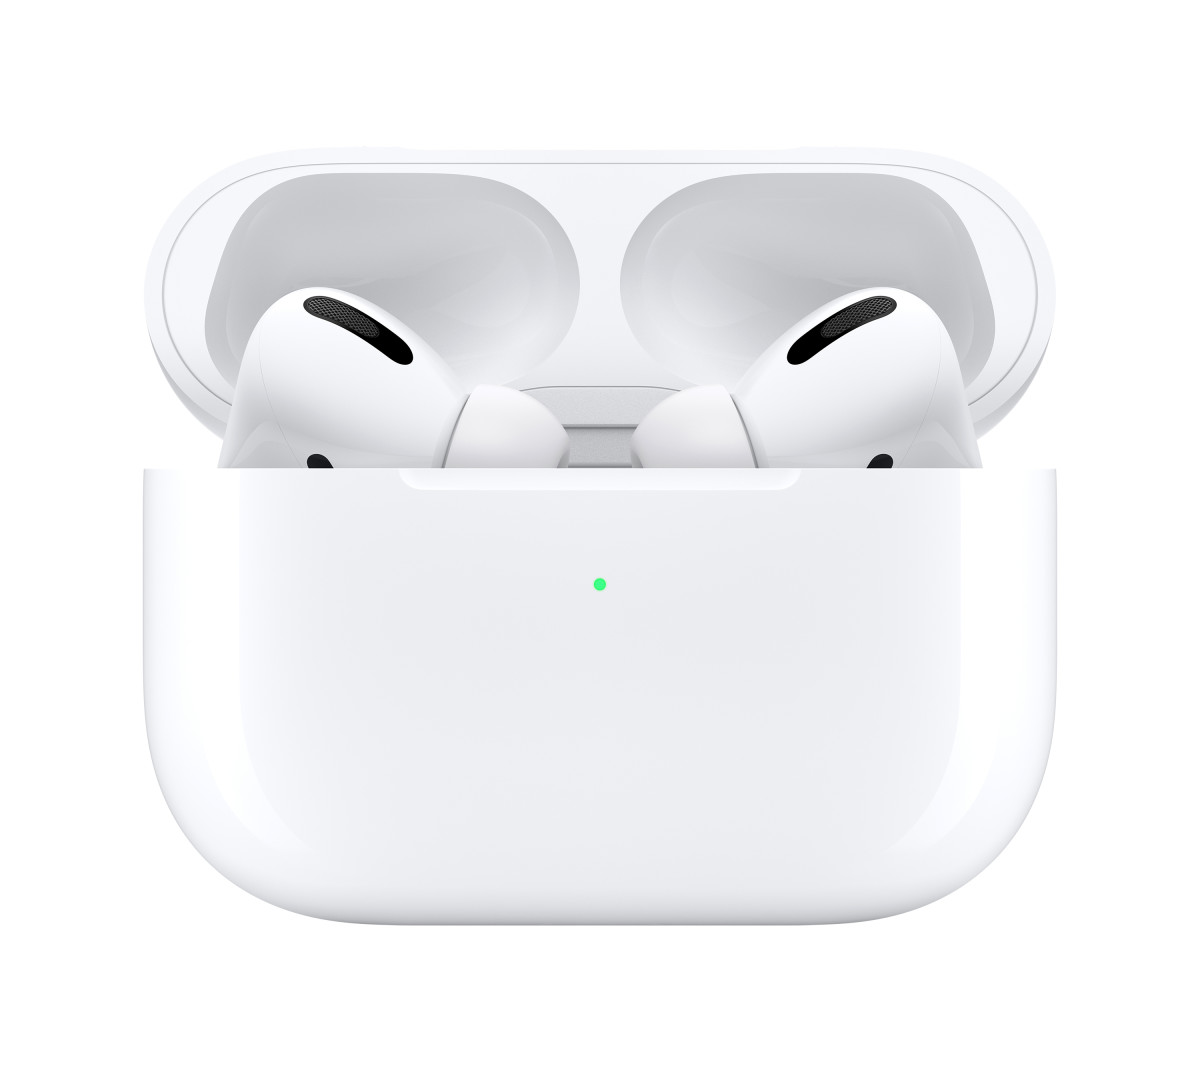 Apple_AirPods-Pro_New-Design-Case-And-AirPods-Pro_102819